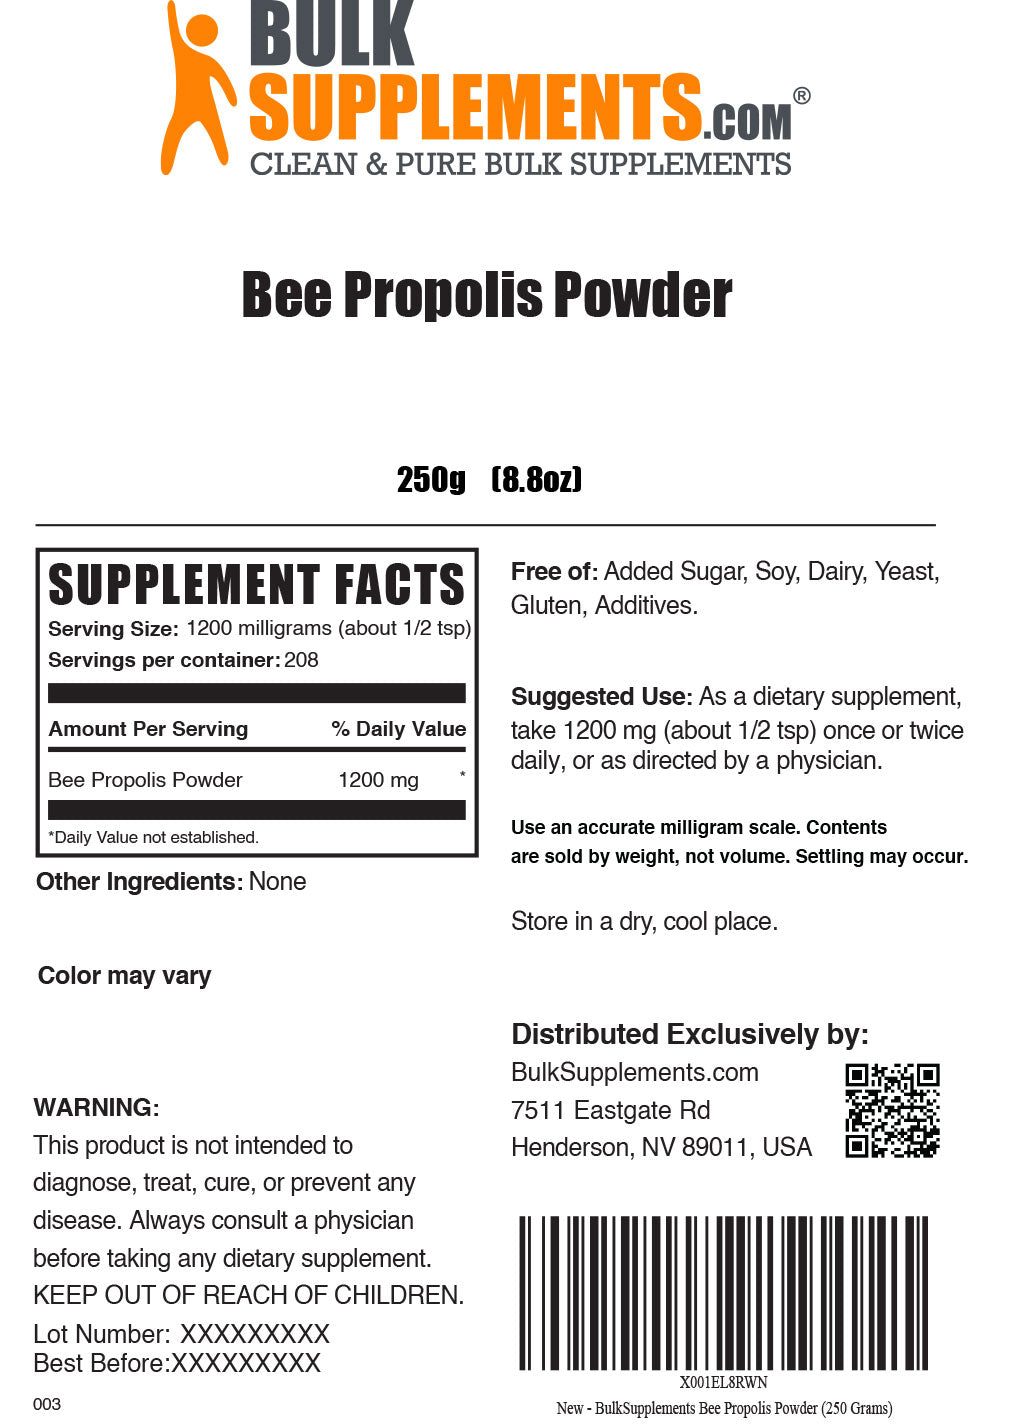 Bee Propolis Powder Supplement Facts and Serving Size for 250g bag